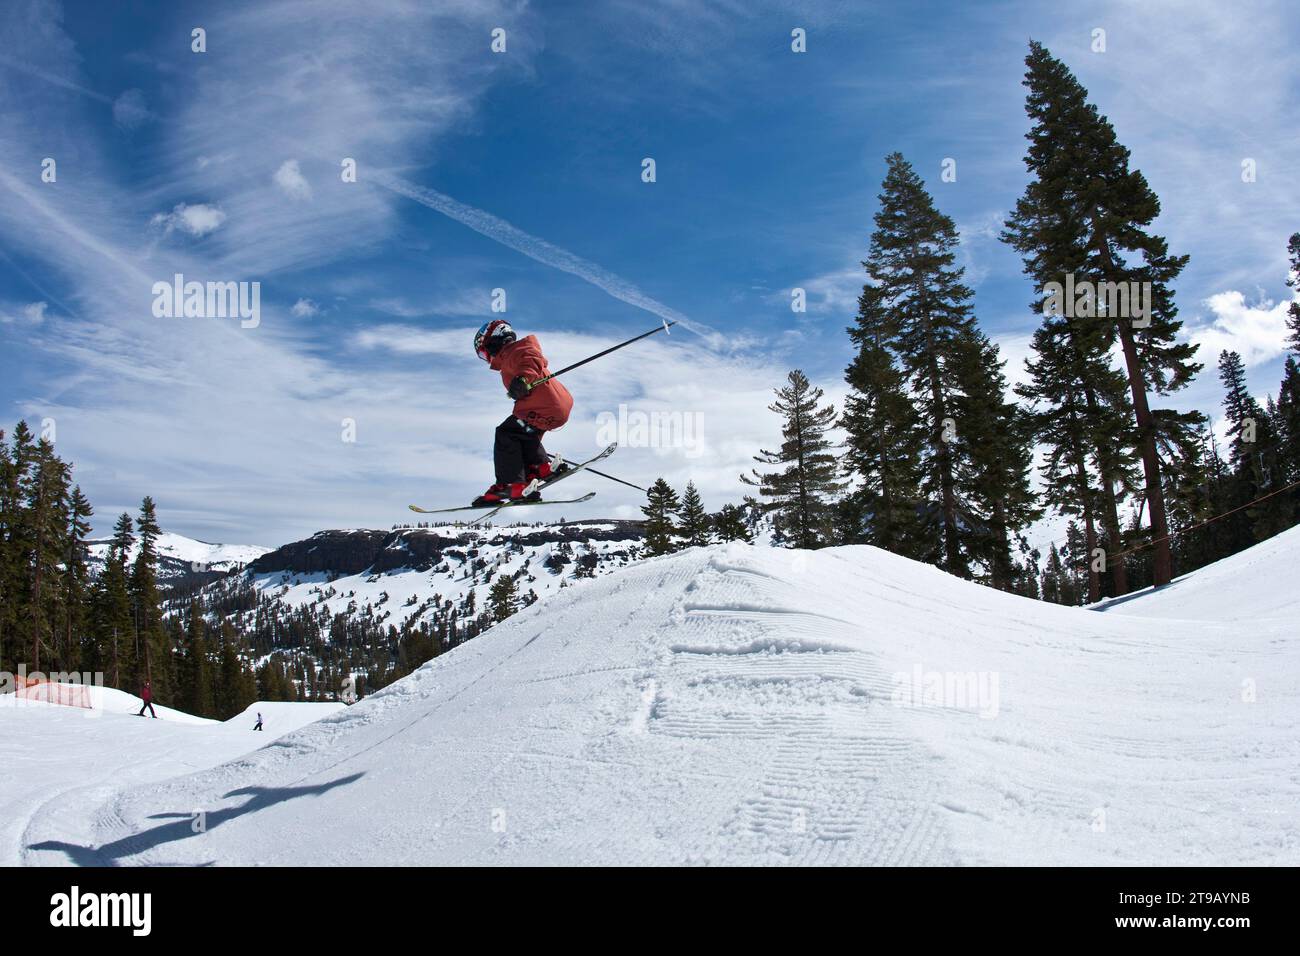 Young skier hitting a jump. Stock Photo